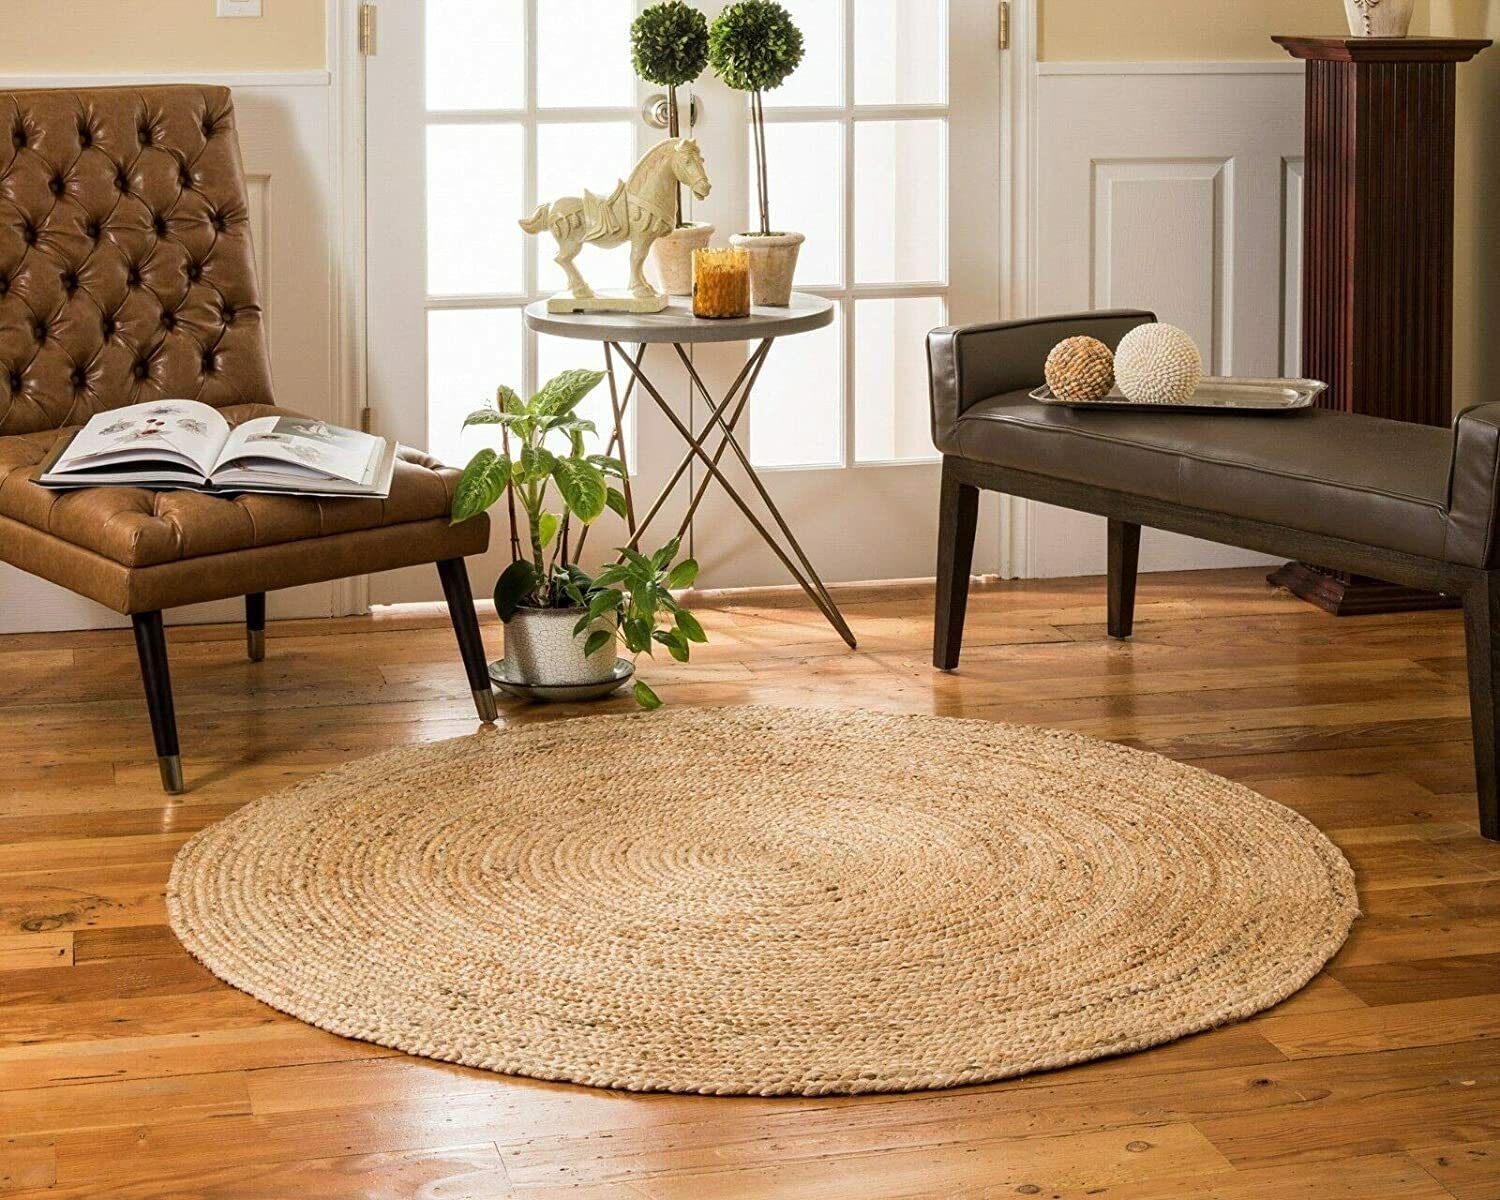 120Cm, Hand Woven Braided Jute Area Rug, Round, Reversible,Color May Vary |  Ebay Throughout Hand Woven Braided Rugs (View 15 of 15)